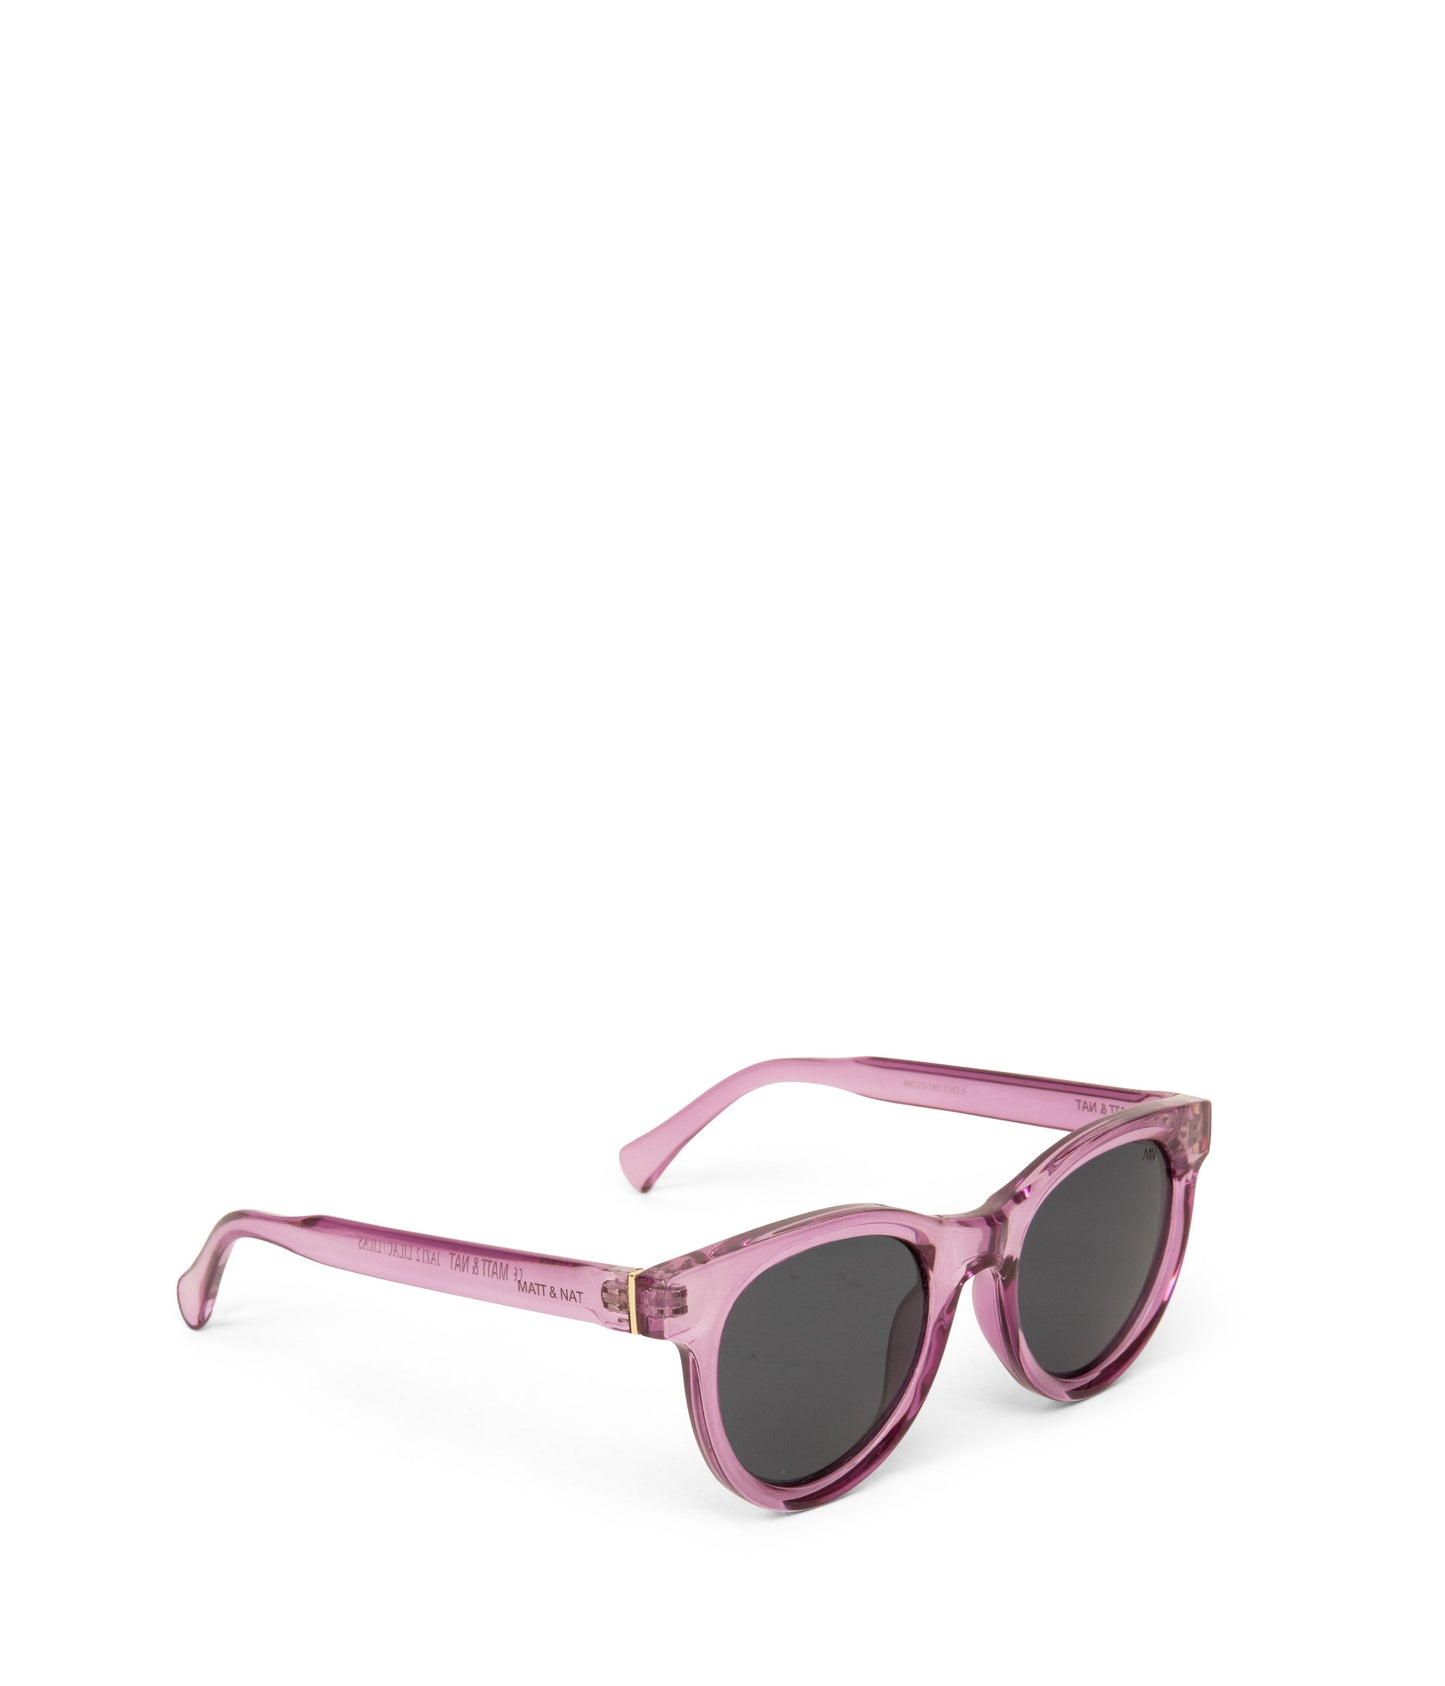 JAZI-2 Recycled Round Sunglasses | Color: Purple, Grey - variant::lilac